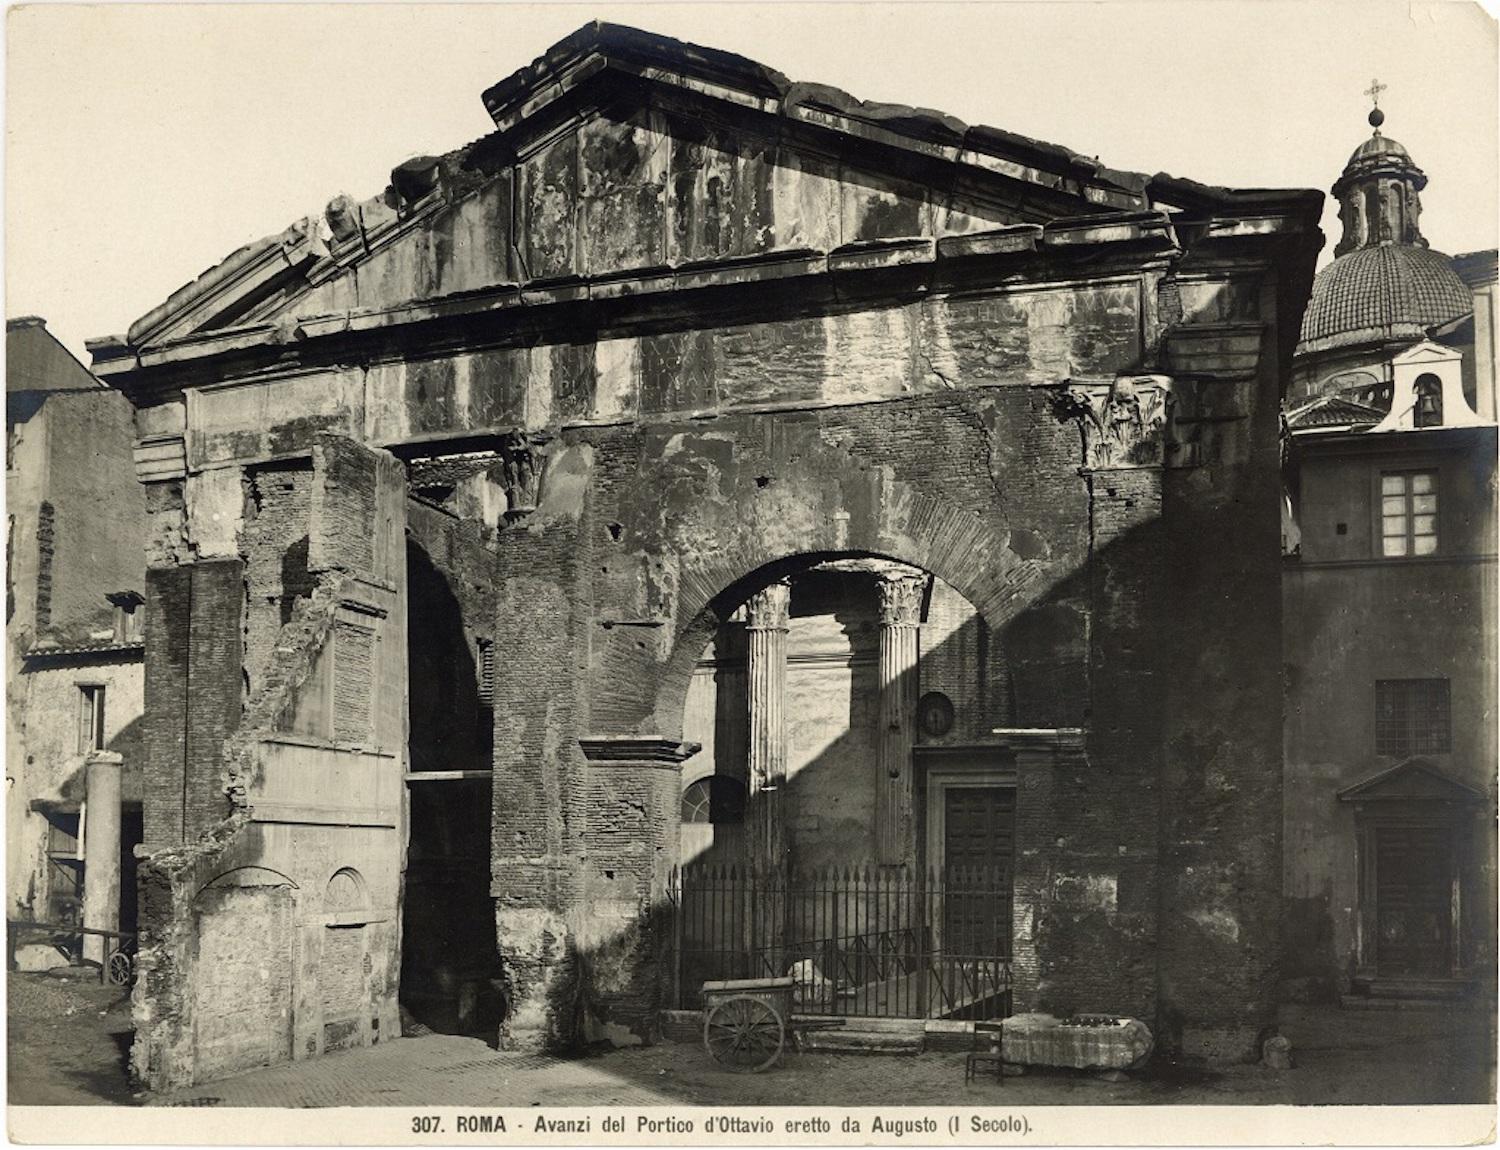 Unknown Black and White Photograph - Two Vintage Views of the Ghetto in Rome by Studio Vasari - 1920s